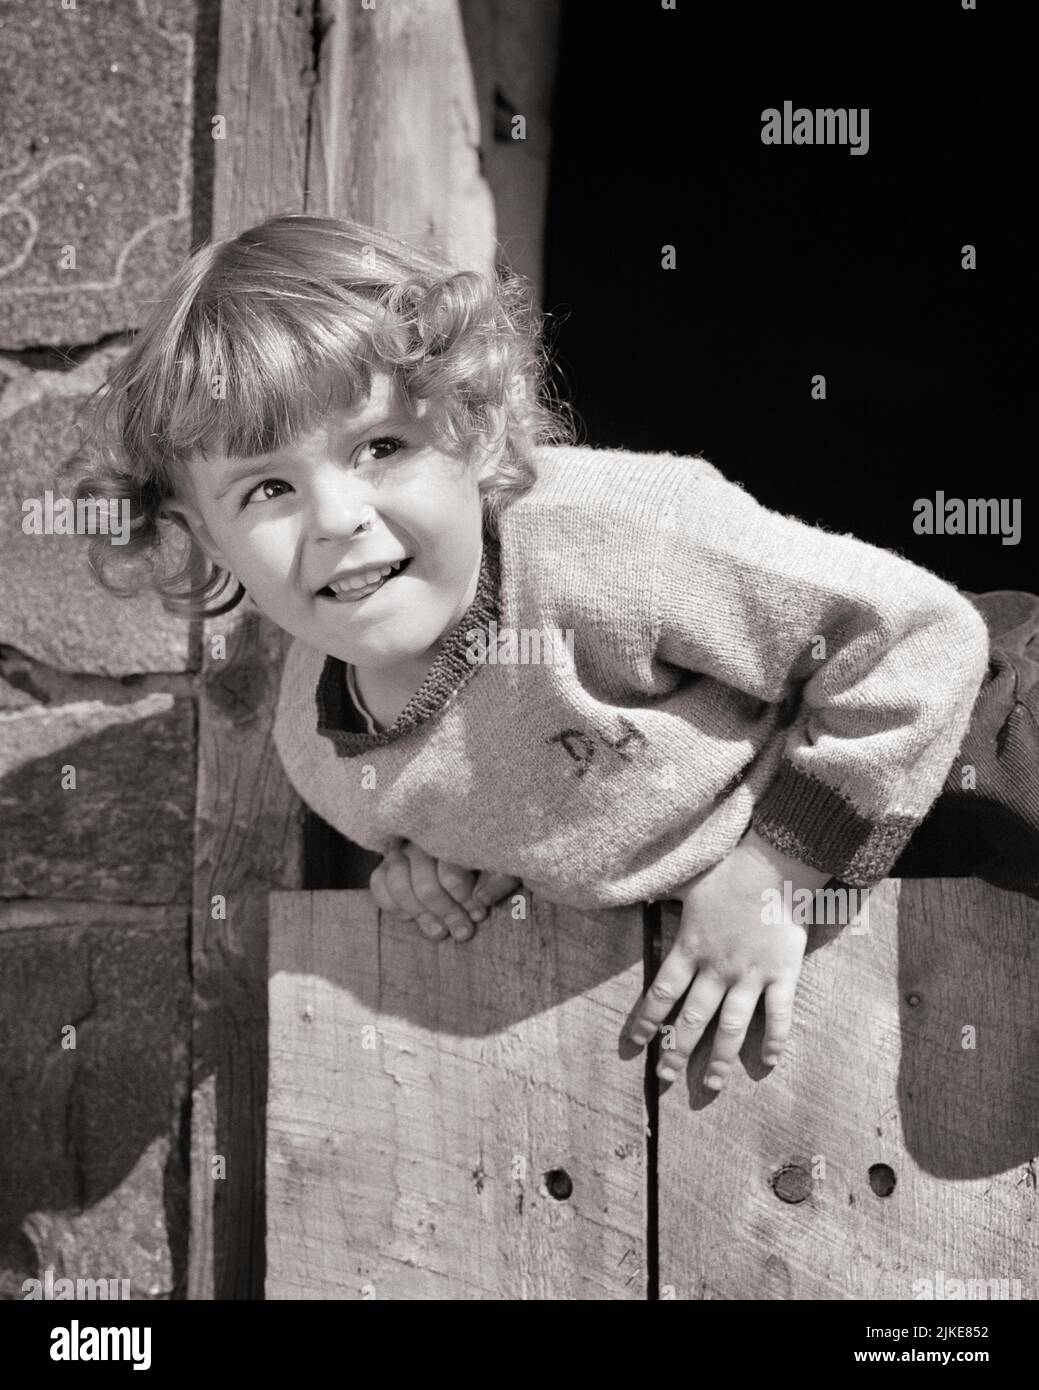 1940s 1950s CHARMING LITTLE GIRL DETERMINED TO CLIMB OVER A WOODEN FENCE - j497 HAR001 HARS EXPRESSIONS B&W TEMPTATION HEAD AND SHOULDERS ADVENTURE STRENGTH EFFORT TOMBOY ESCAPING CONCEPTUAL ATHLETES ESCAPE STRUGGLE DETERMINED JUVENILES BLACK AND WHITE CAUCASIAN ETHNICITY CHANCE HAR001 OLD FASHIONED Stock Photo